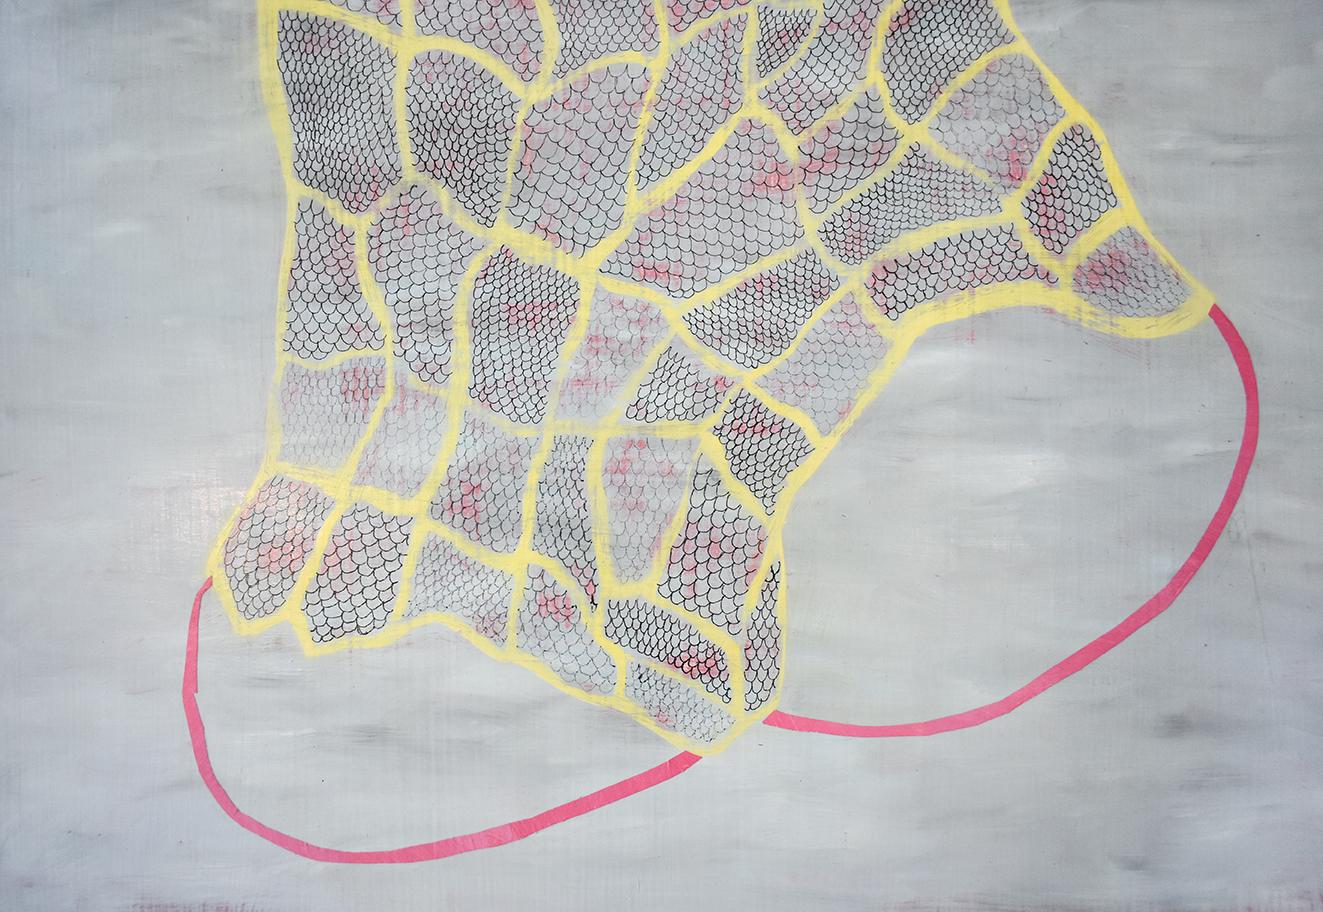 Net (Non-Representational Painting of Yellow Grid on Wood Panel) - Gray Abstract Painting by Donise English